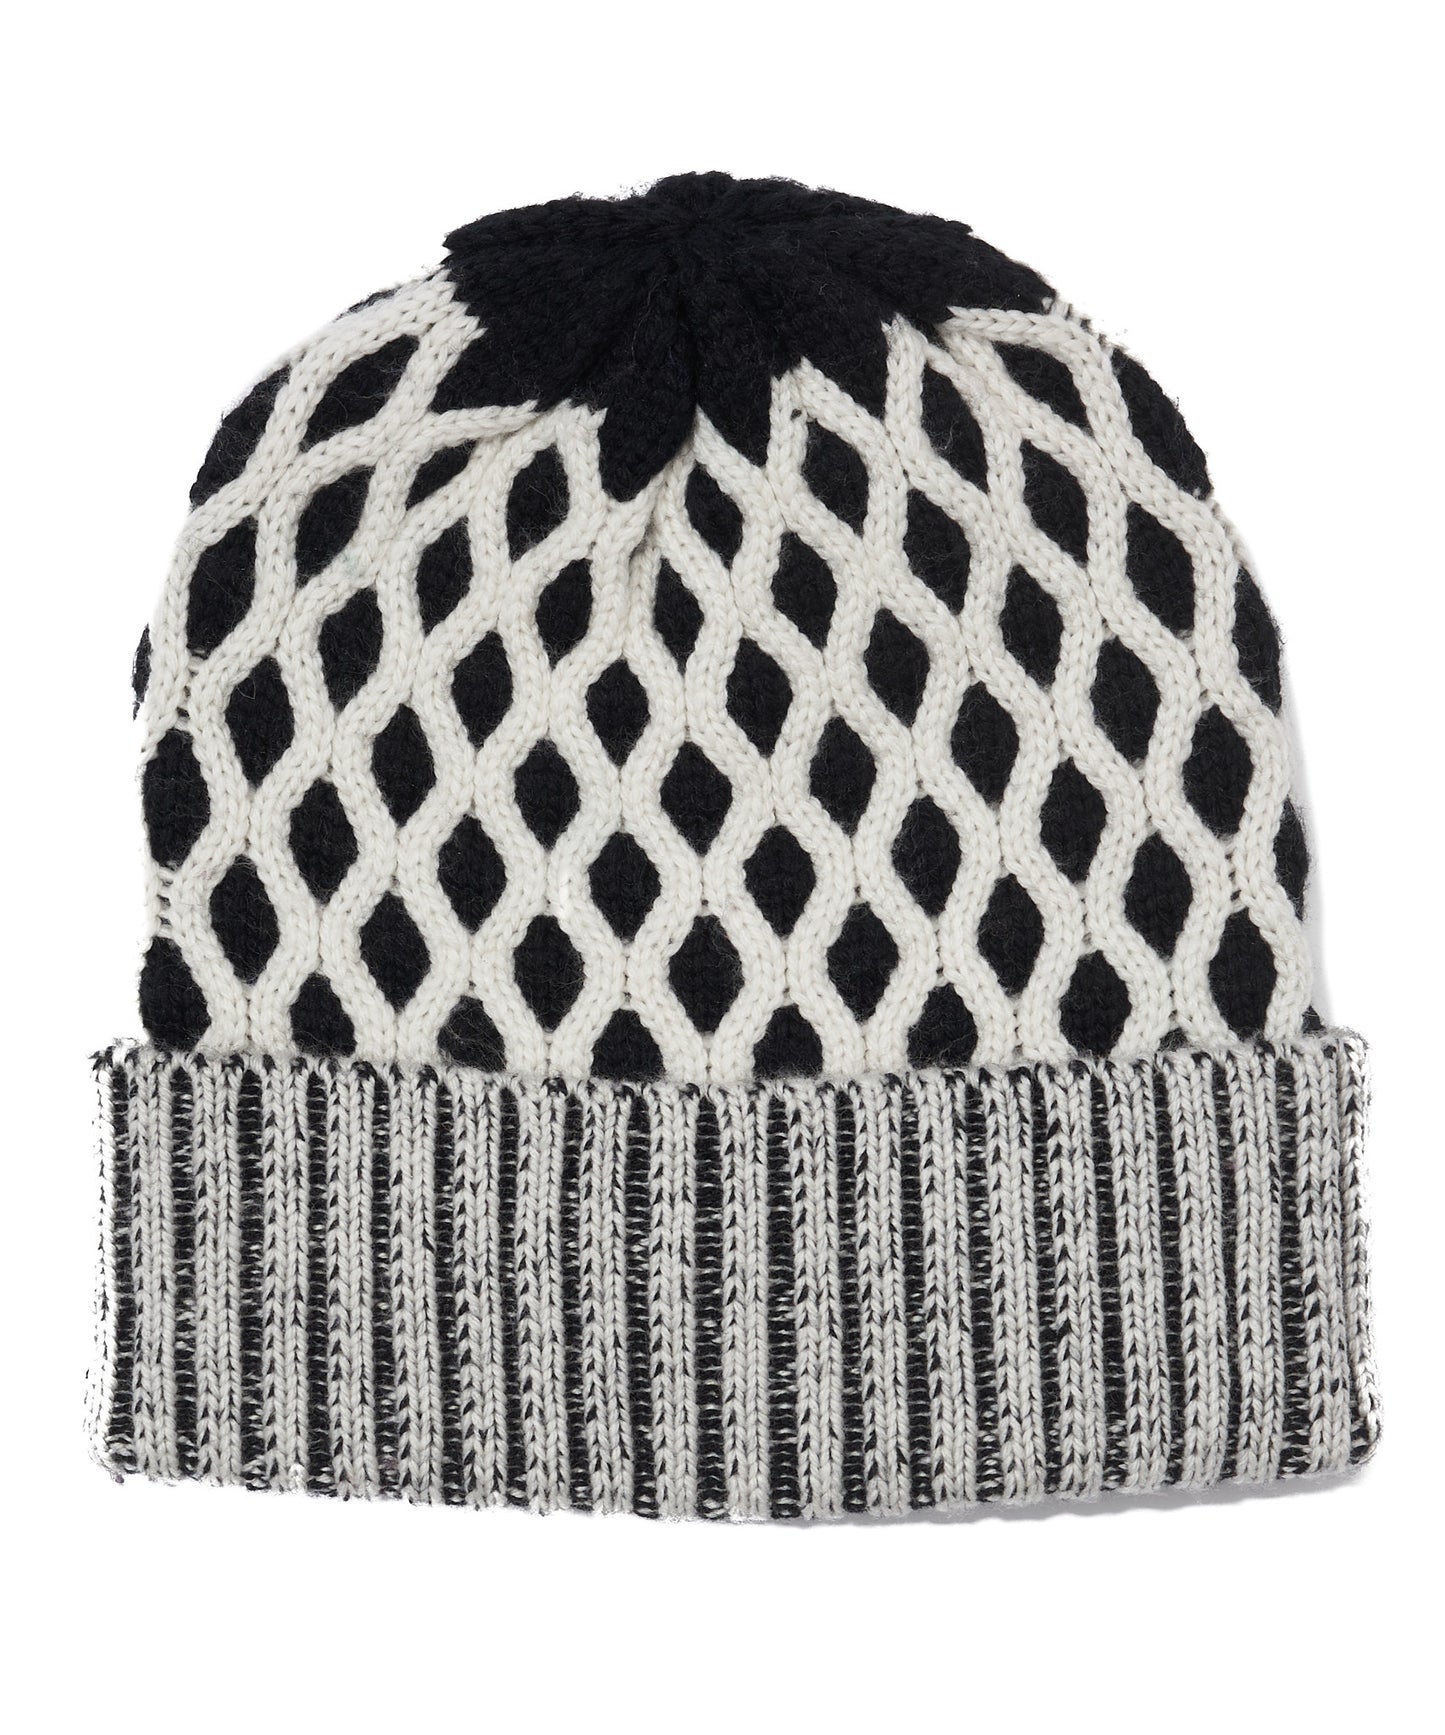 Recycled Bi-color Honeycomb Beanie in color Black/White